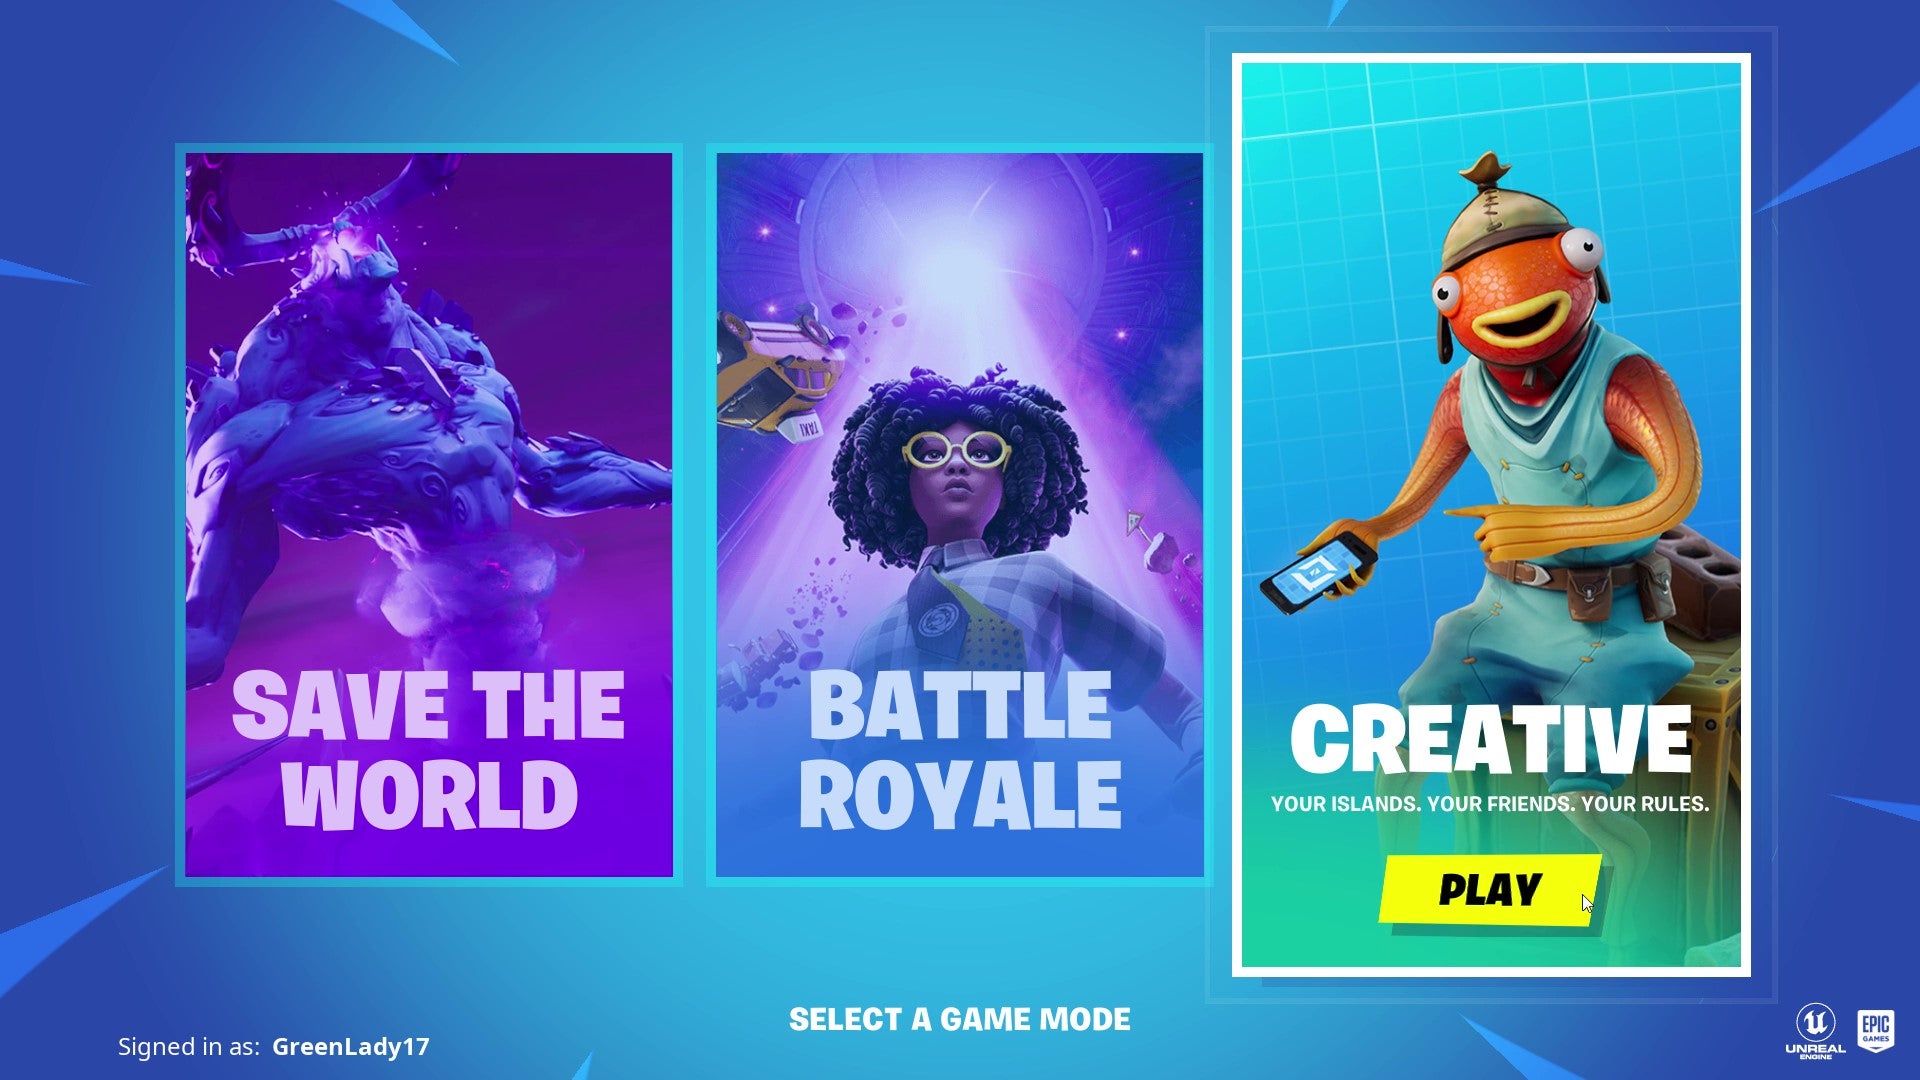 The mode select screen that appears when you launch Fortnite. Choices are Save the World, Battle Royale, and Creative.